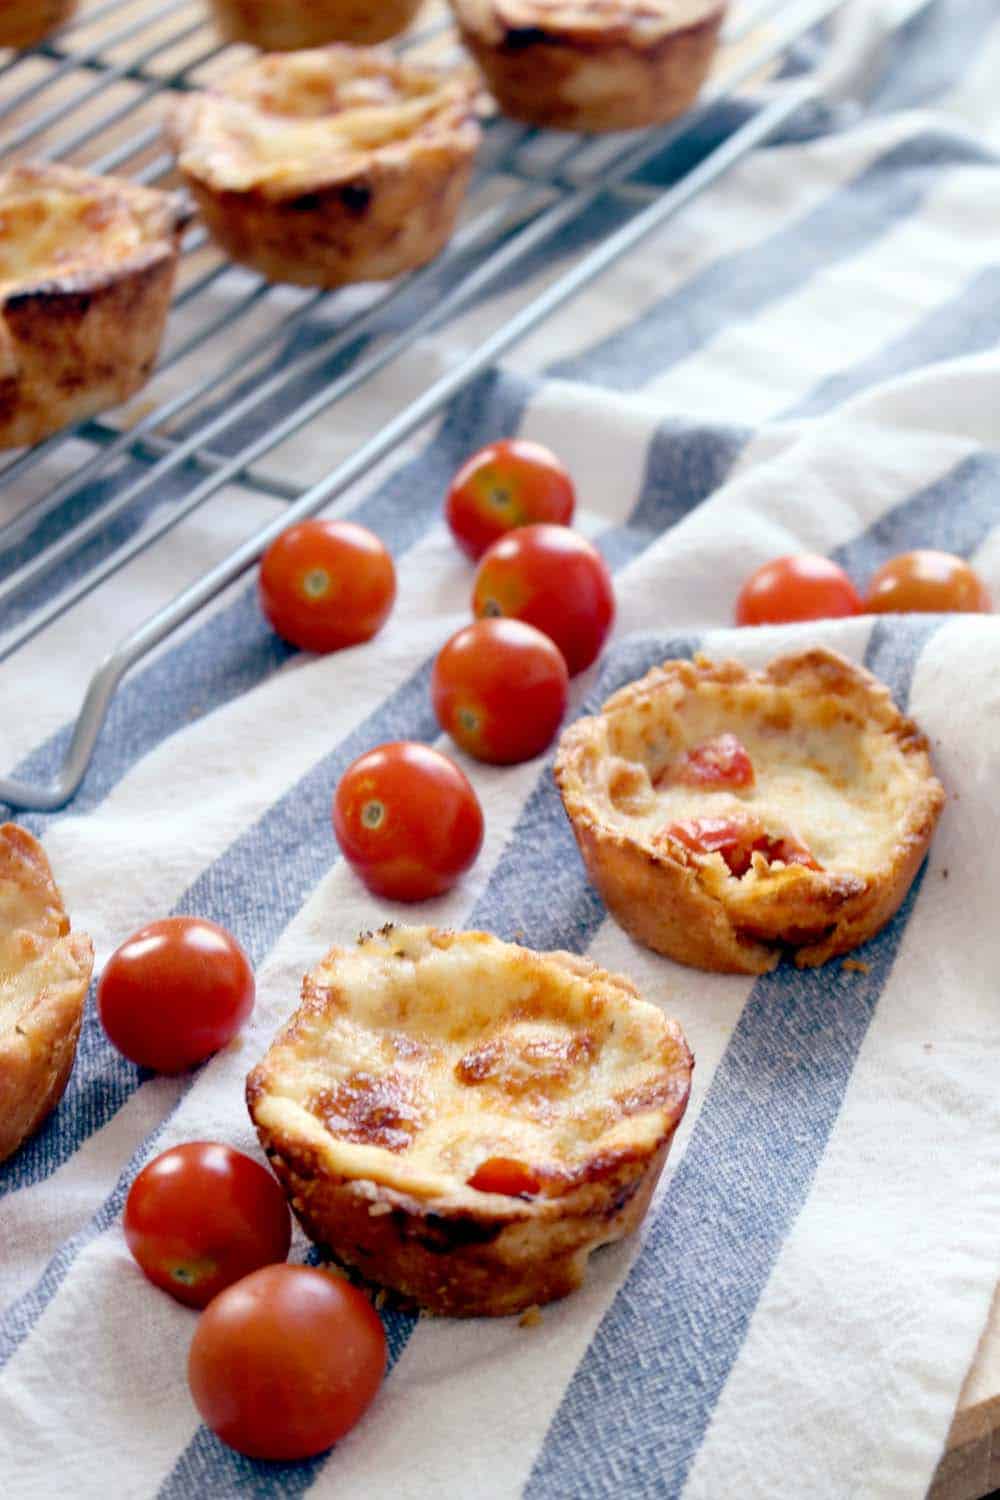 Two mini tomato pies in the foreground on a blue and white striped cloth with tomatoes scattered around them. A wooling rack holding more tomato pies is in the background.